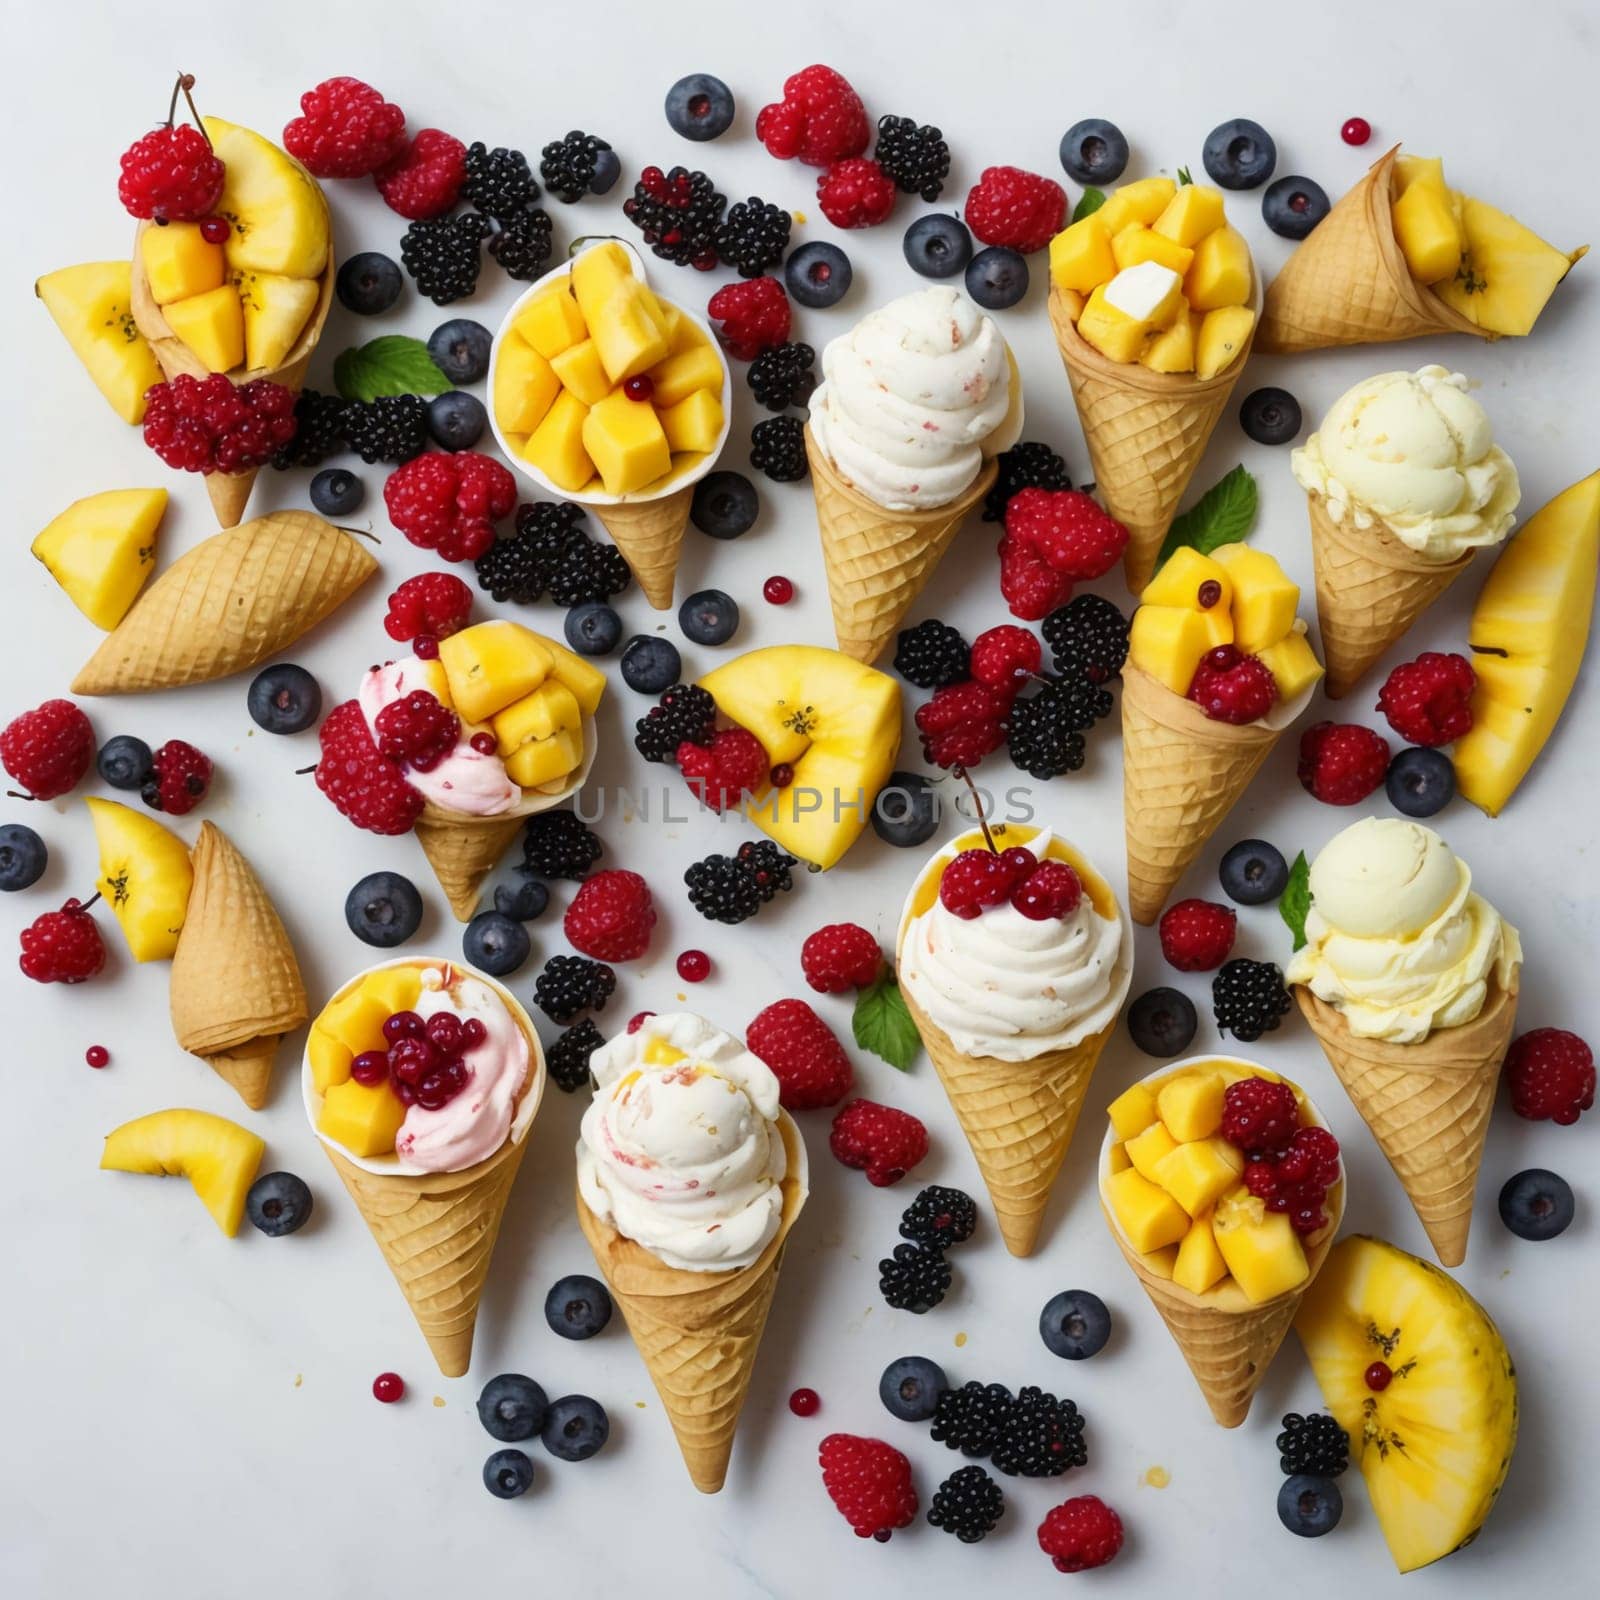 Different flavors of ice cream cones with frozen mango, pineapple, red and black currant berries on a white background. Summer creative concept